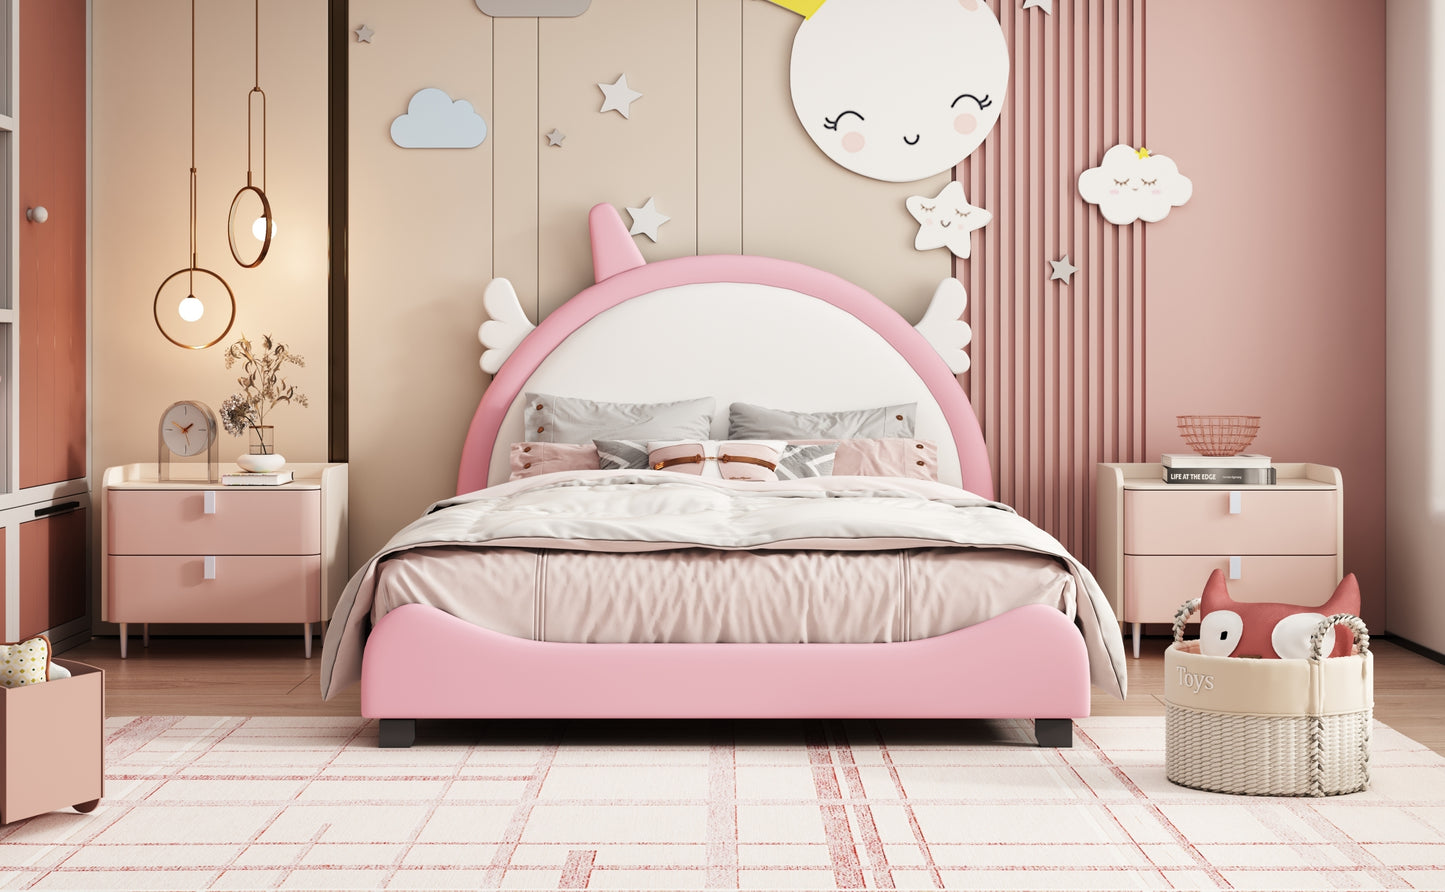 Cute Full size Upholstered Bed With Unicorn Shape Headboard,Full Size Platform Bed with Headboard and Footboard,White+Pink